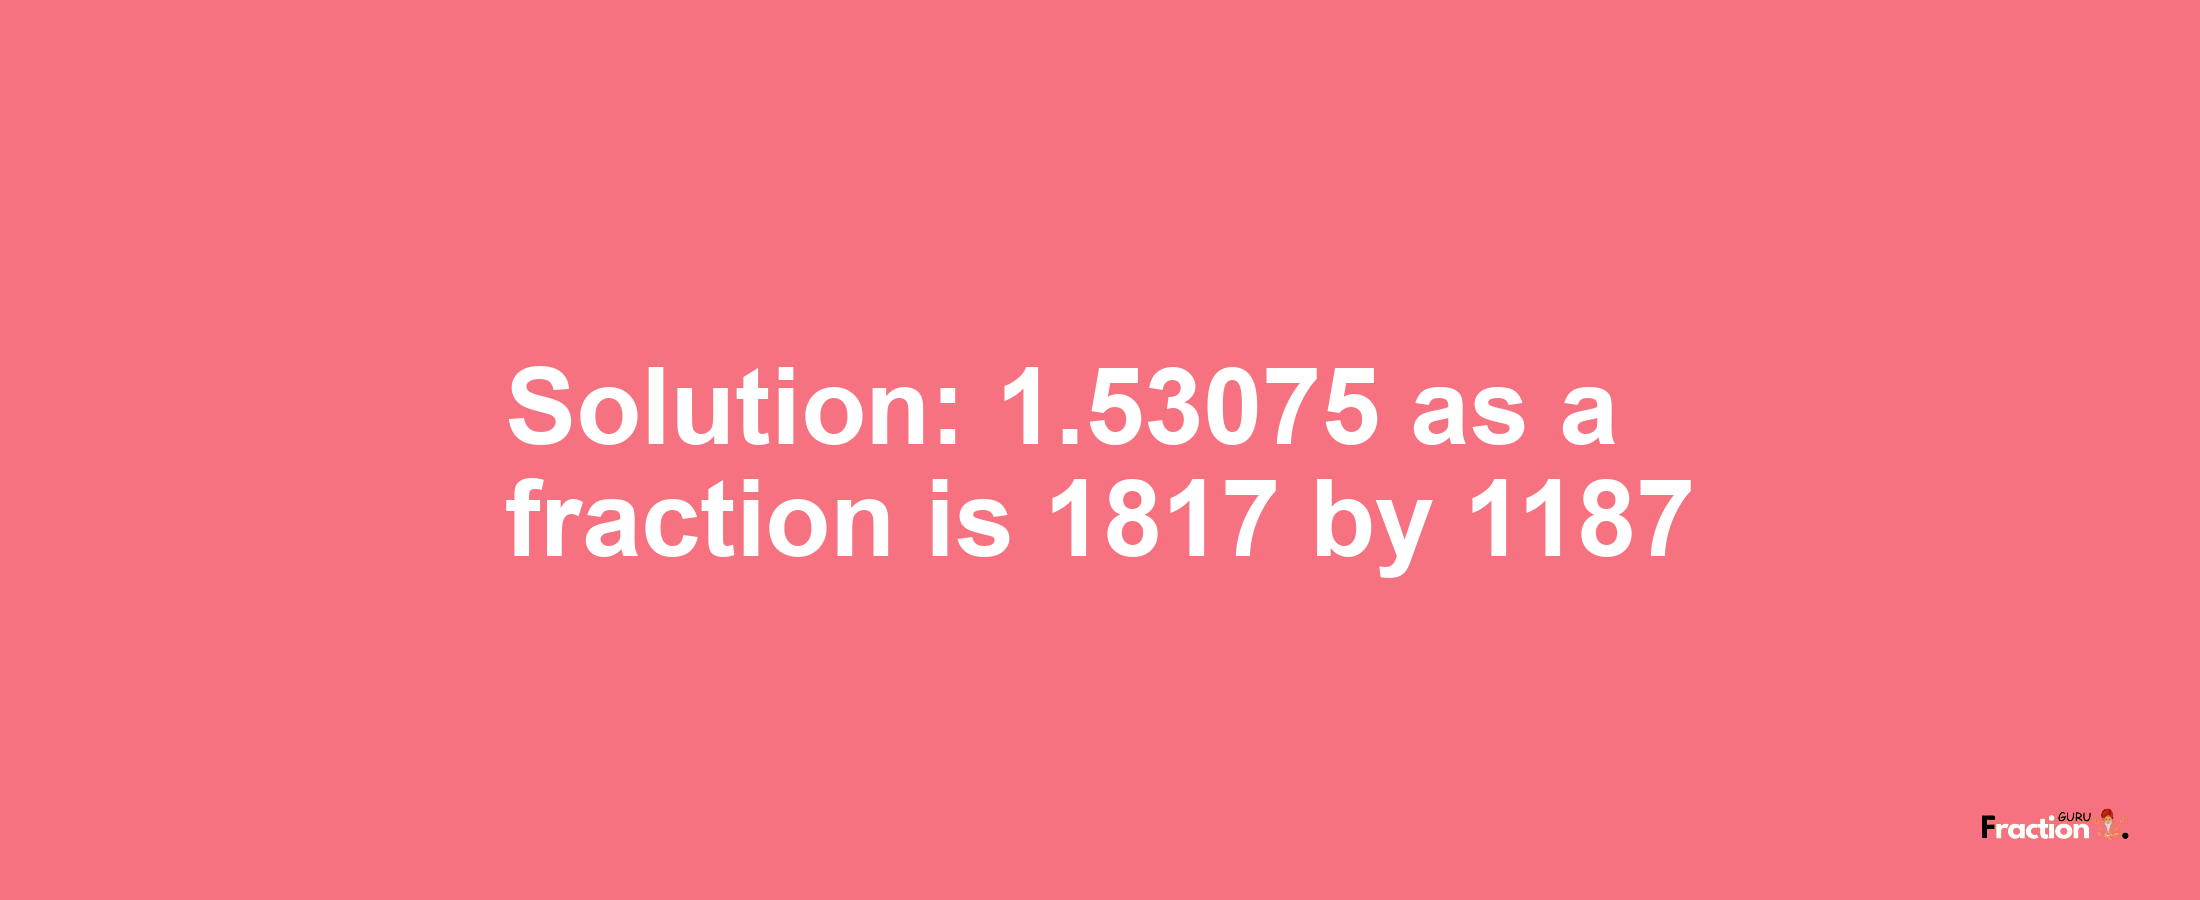 Solution:1.53075 as a fraction is 1817/1187